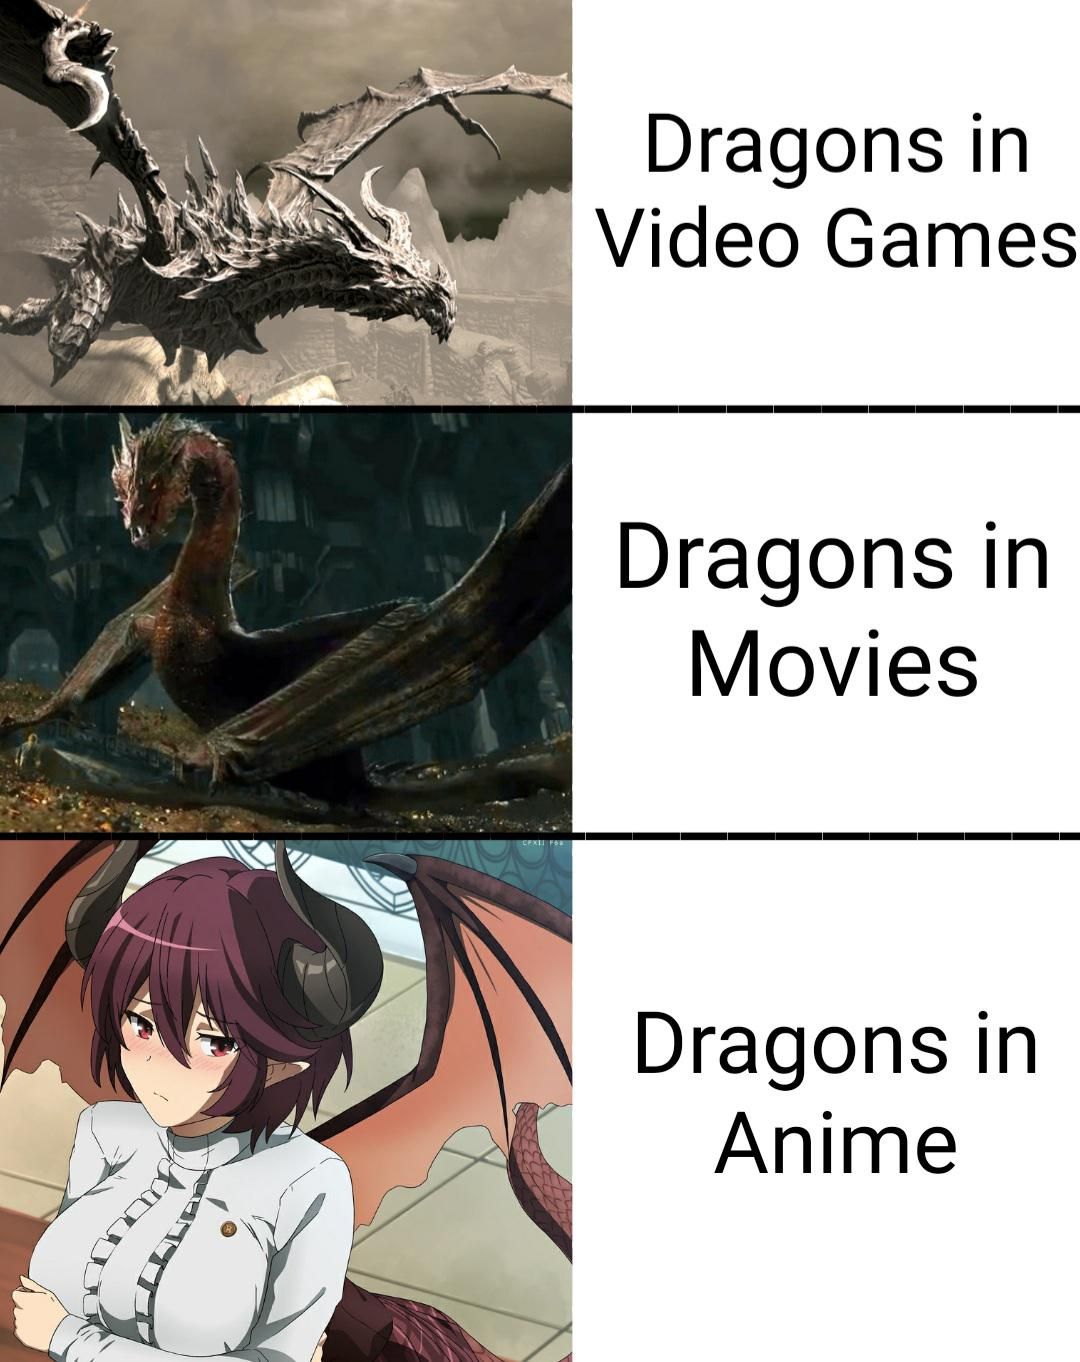 Anime just makes everything better.